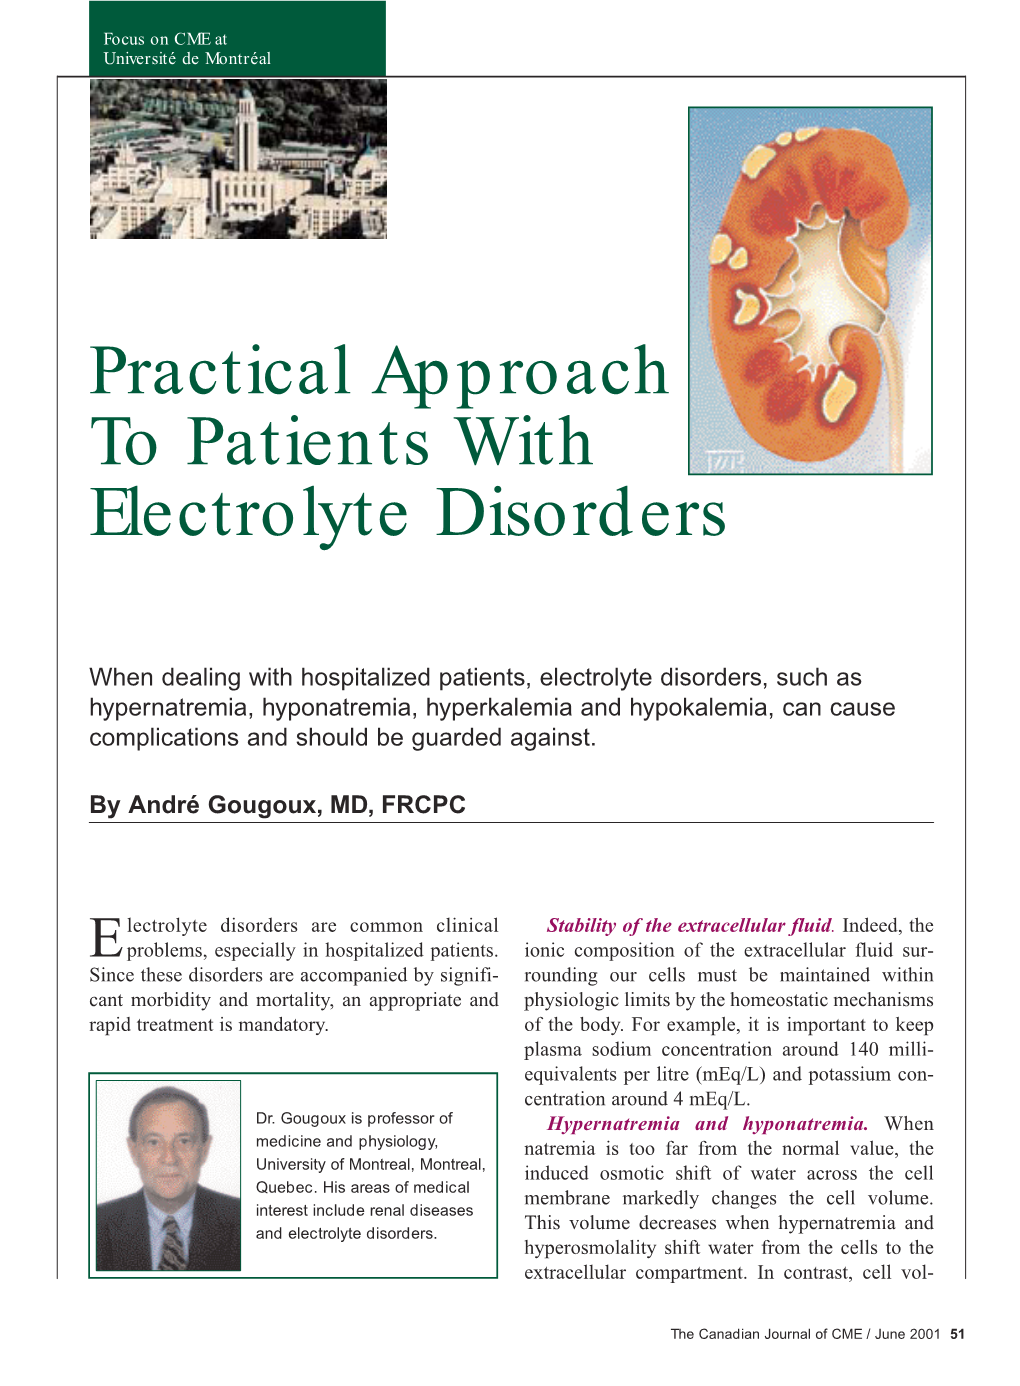 Electrolyte Disorders